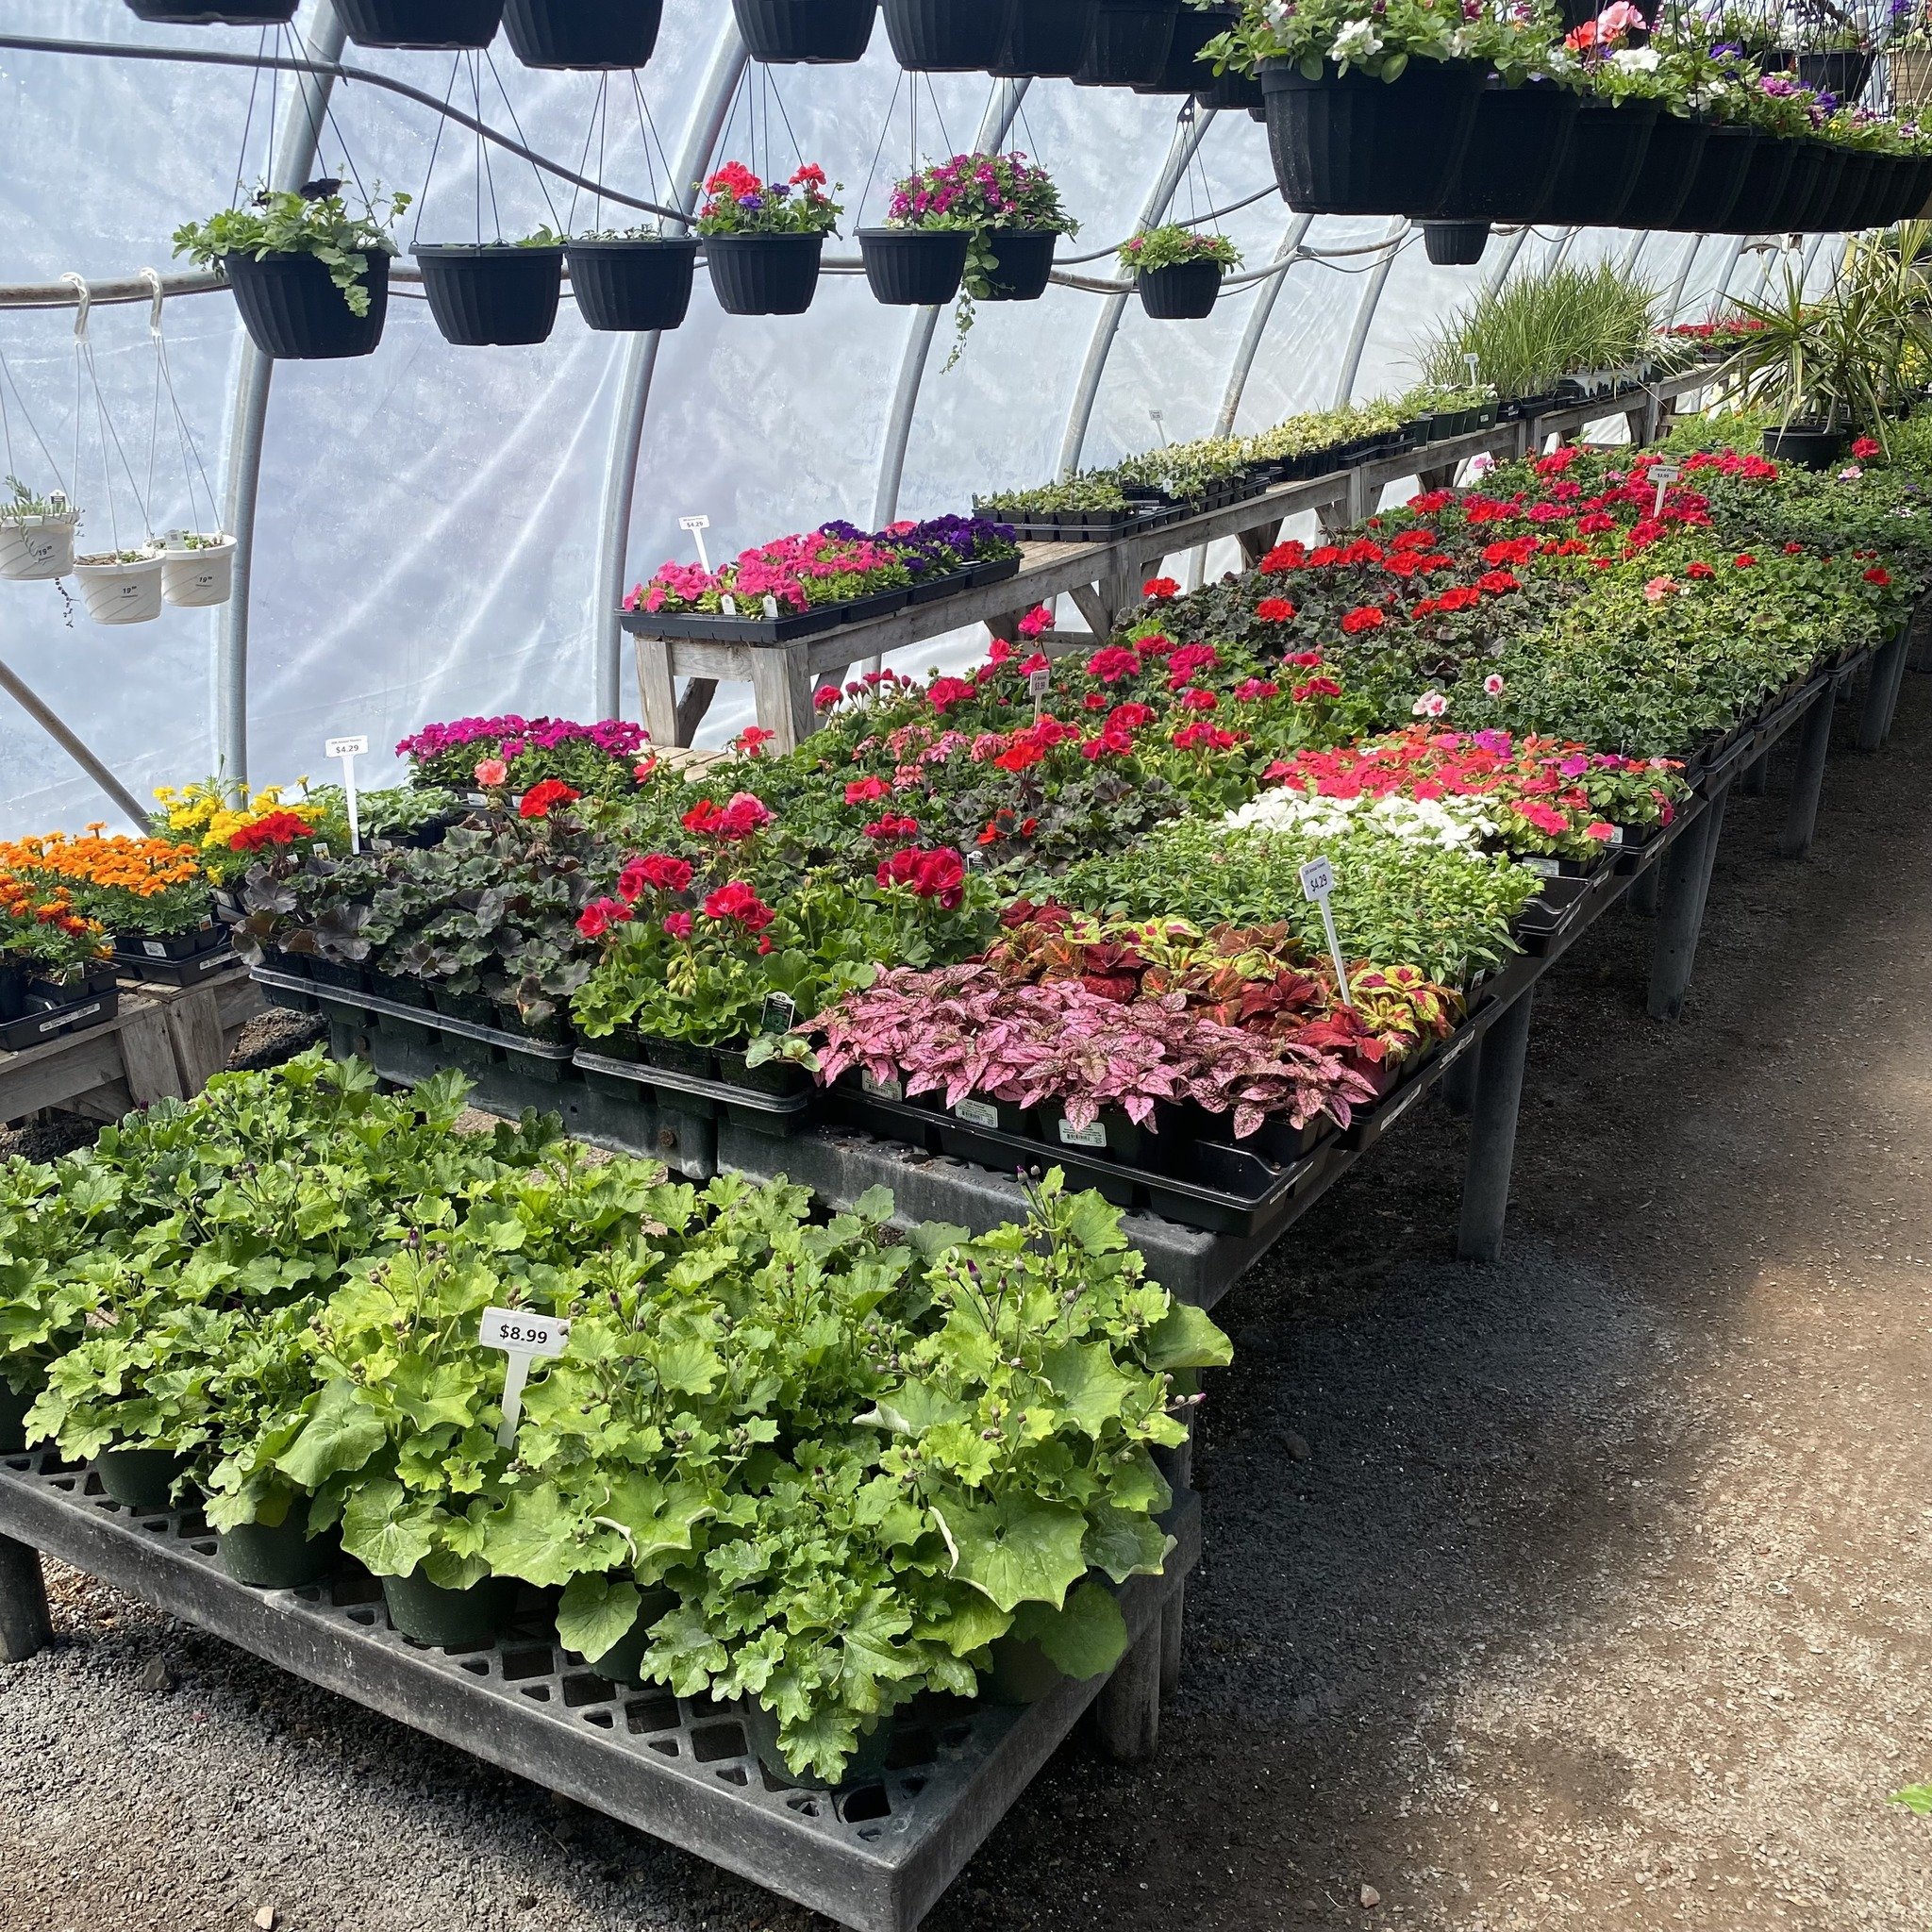 🌸🌿 Spring has sprung at Shades of Green! 🌿🌸 Our greenhouses are bursting with vibrant blooms and lush greenery, ready to brighten up your garden. Come explore our beautiful selection of flowers and plants, perfect for adding a pop of color to you